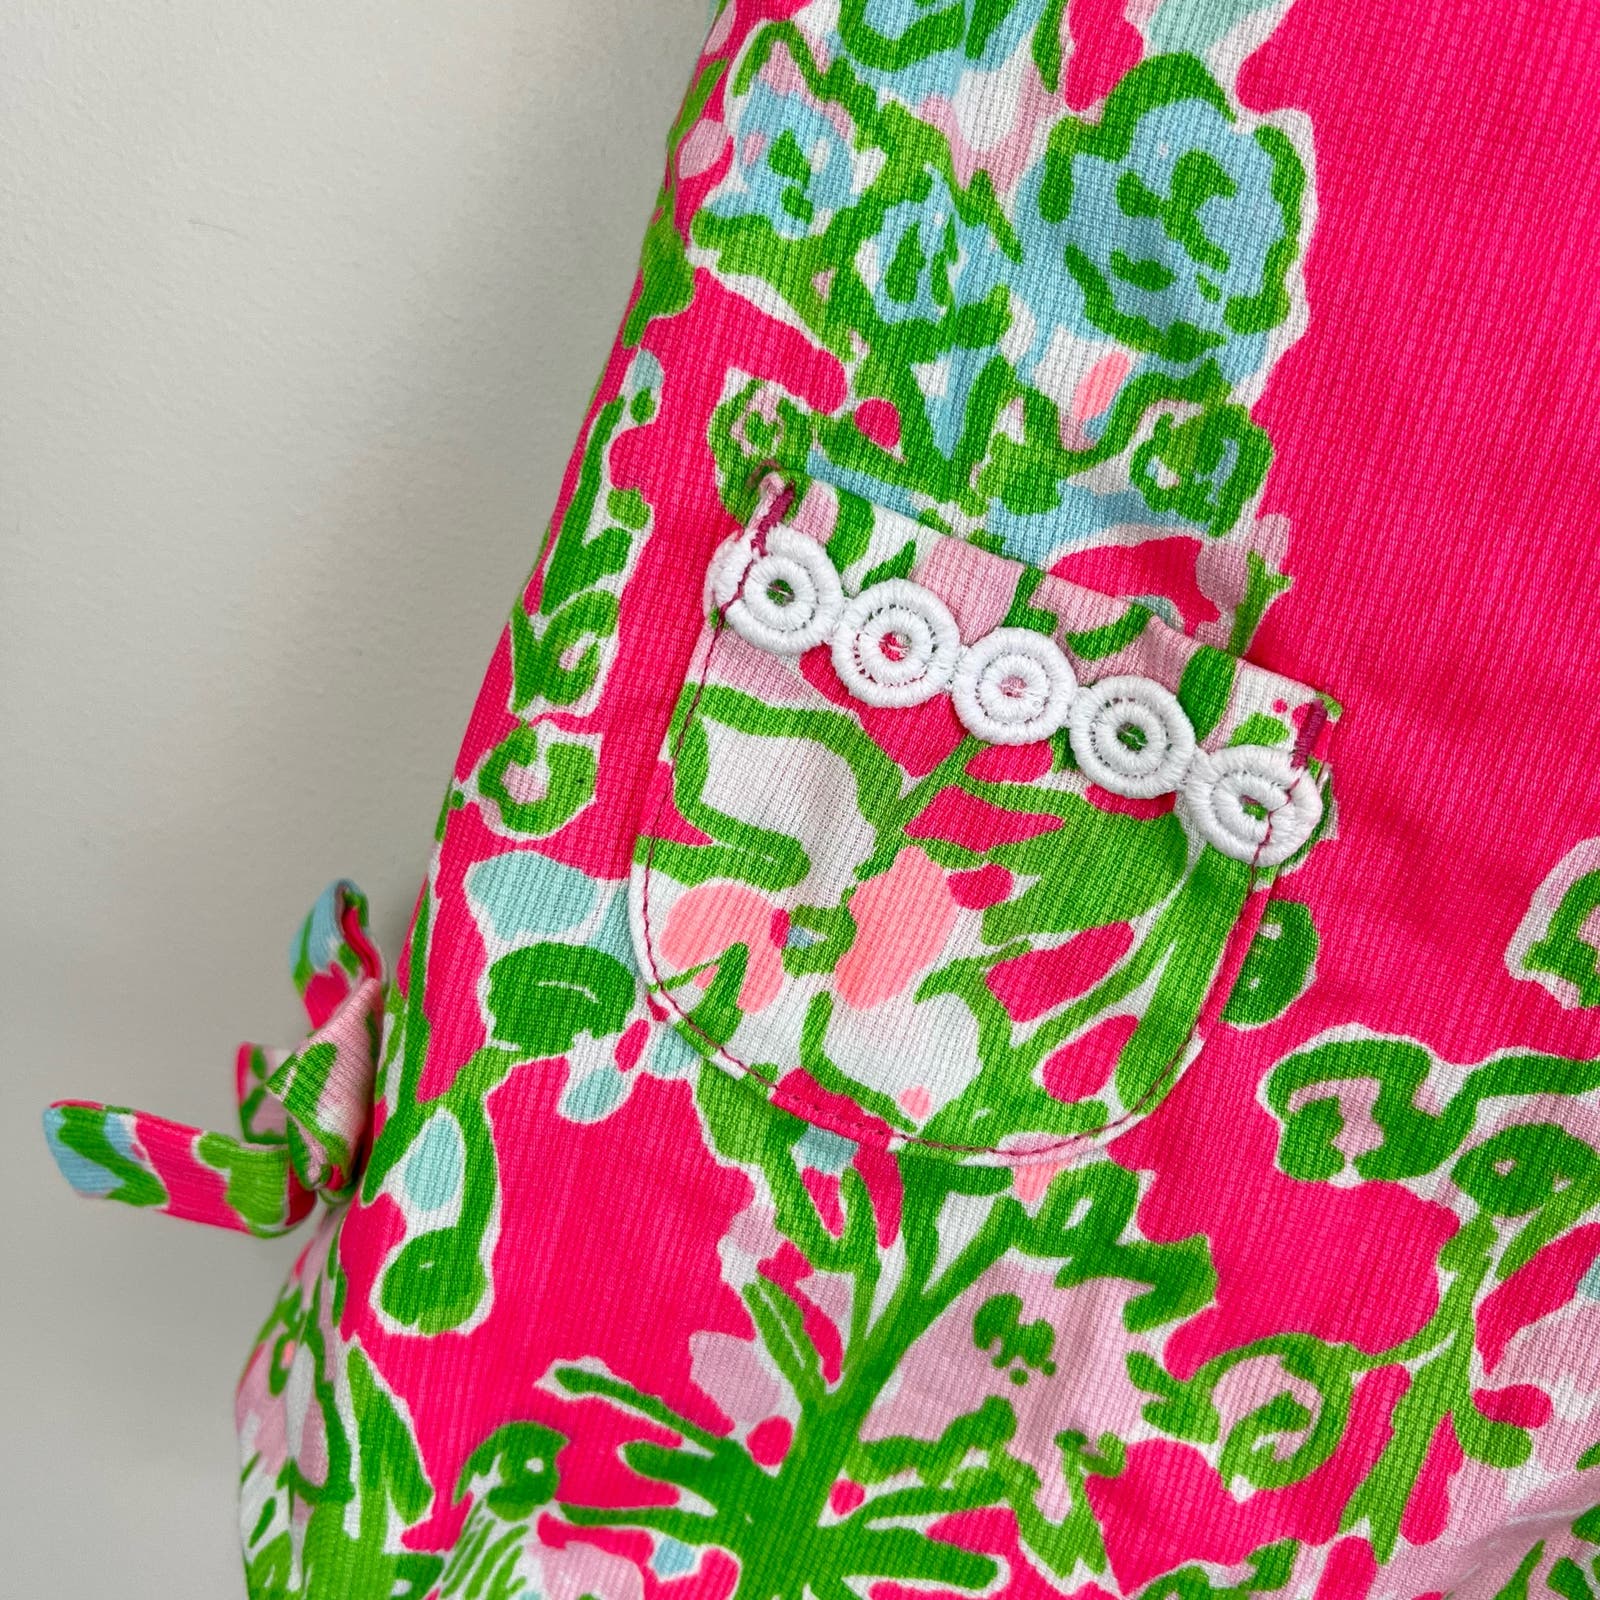 Lilly Pulitzer Girls Flamingo Pink Southern Charm Shift Dress 6-12 Months